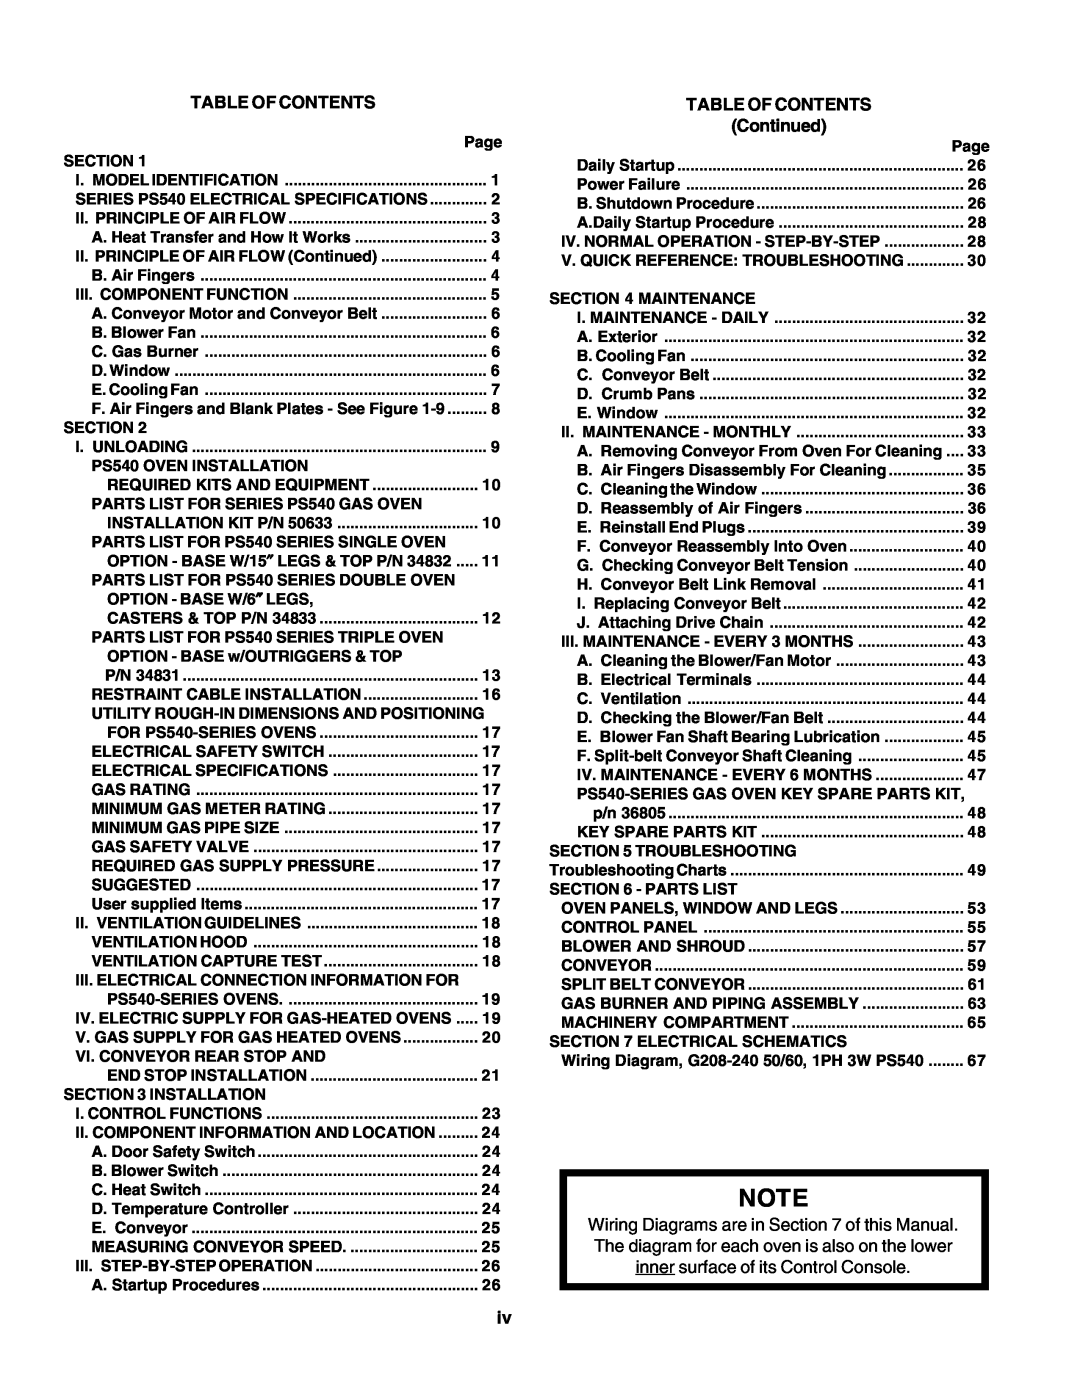 Middleby Marshall PS540 installation manual Table Of Contents, Continued 